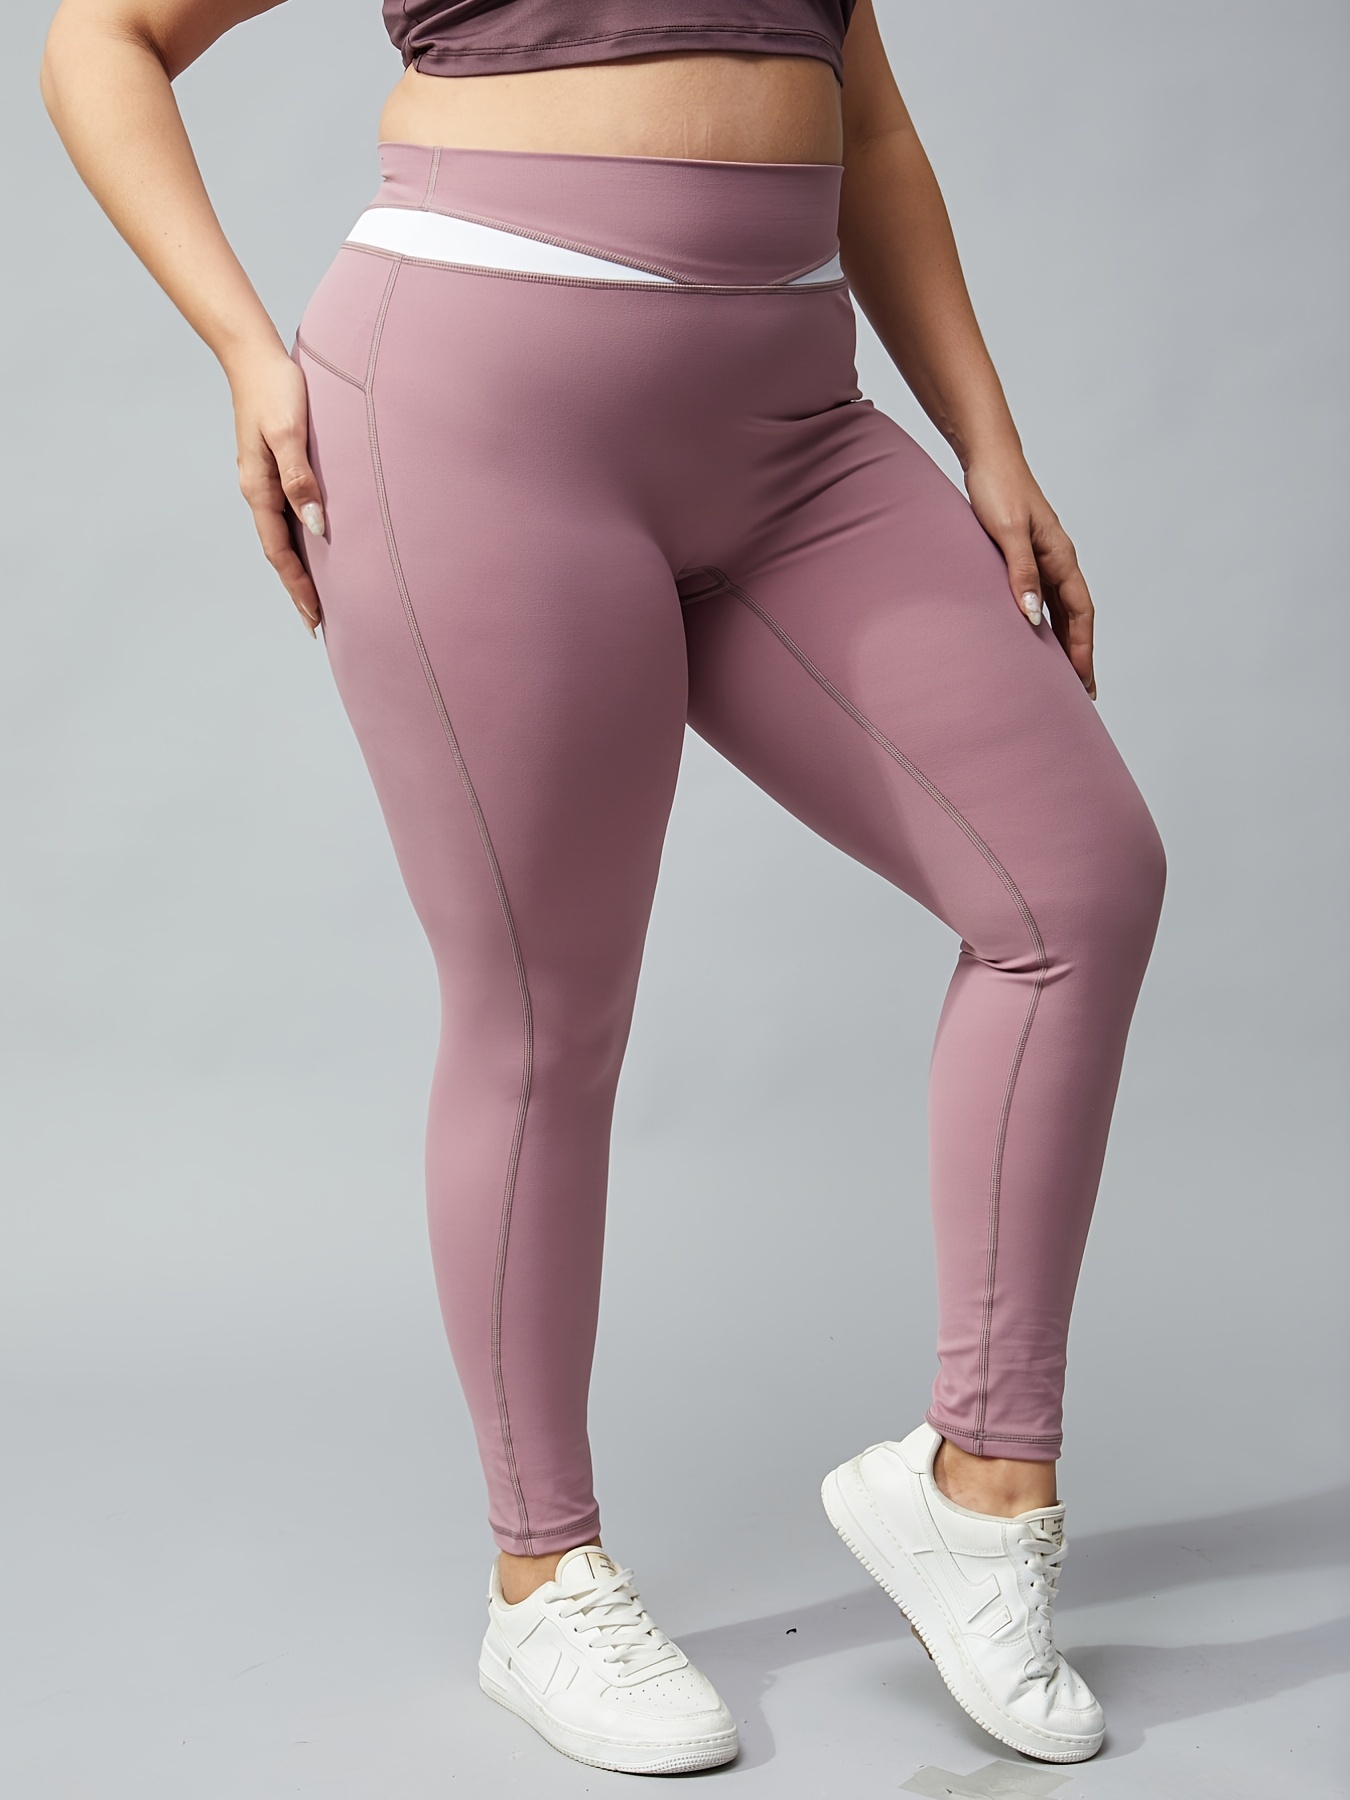 Plus Size Quick Drying High * Breathable Sports Leggings, Women's Plus  Medium Stretch Solid Running Fitness Yoga Skinny Pants